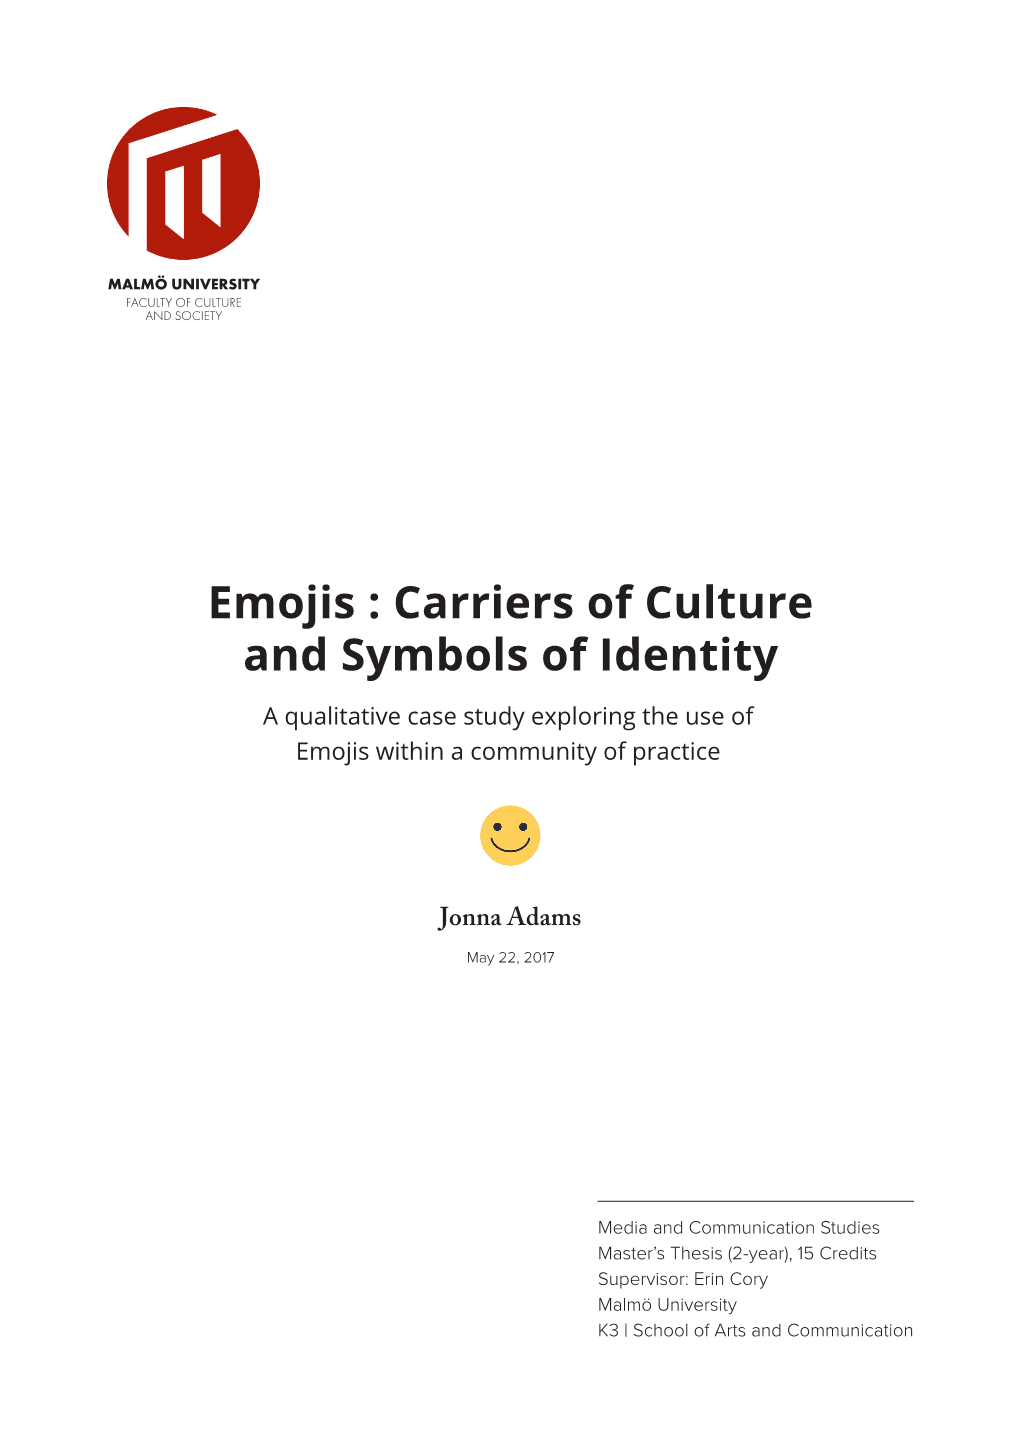 Emojis : Carriers of Culture and Symbols of Identity a Qualitative Case Study Exploring the Use of Emojis Within a Community of Practice